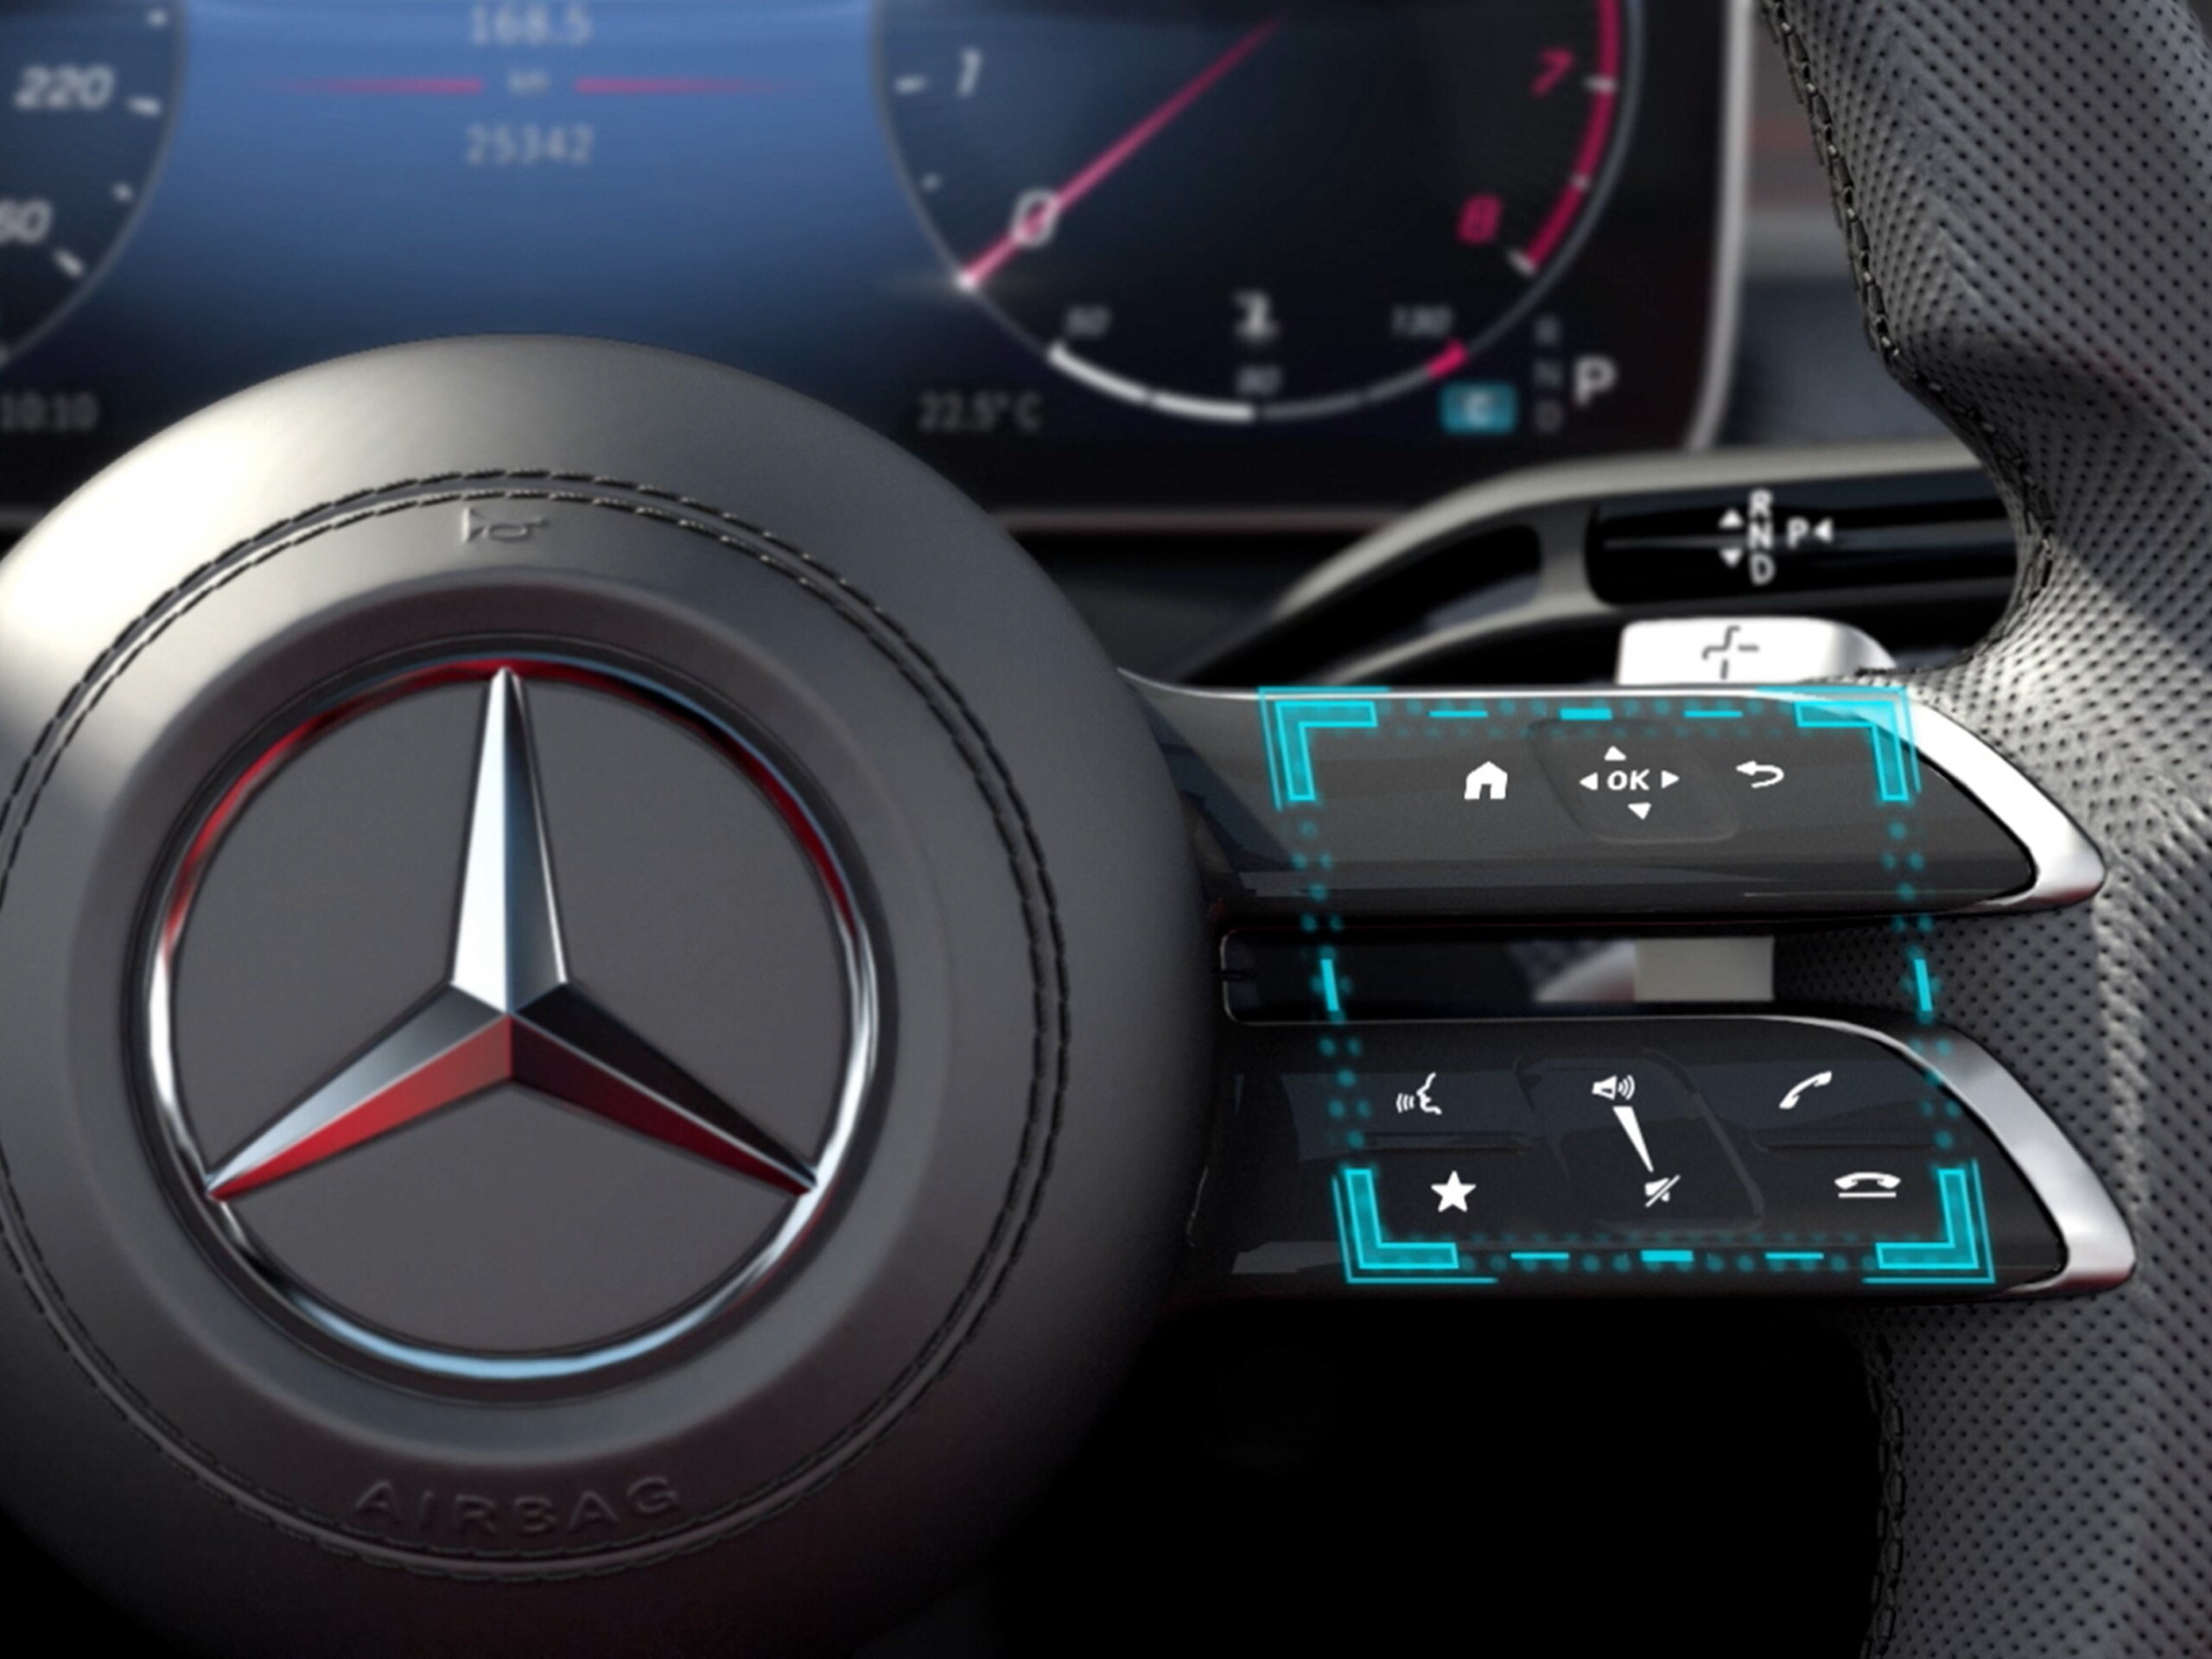 The video shows how the MBUX touch control concept of the Mercedes-Benz C-Class works.